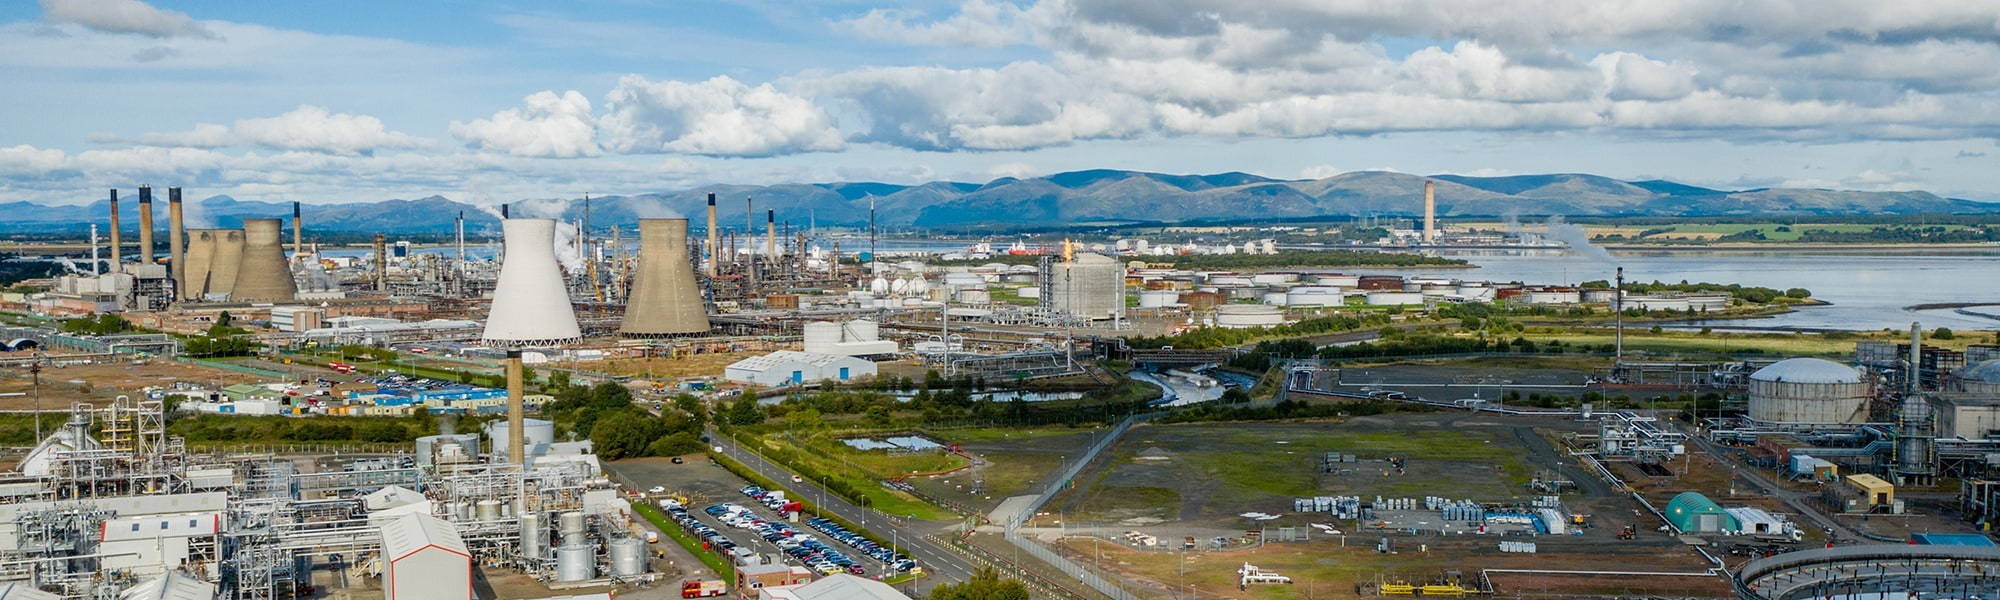 zoomed out image of Grangemouth refinery